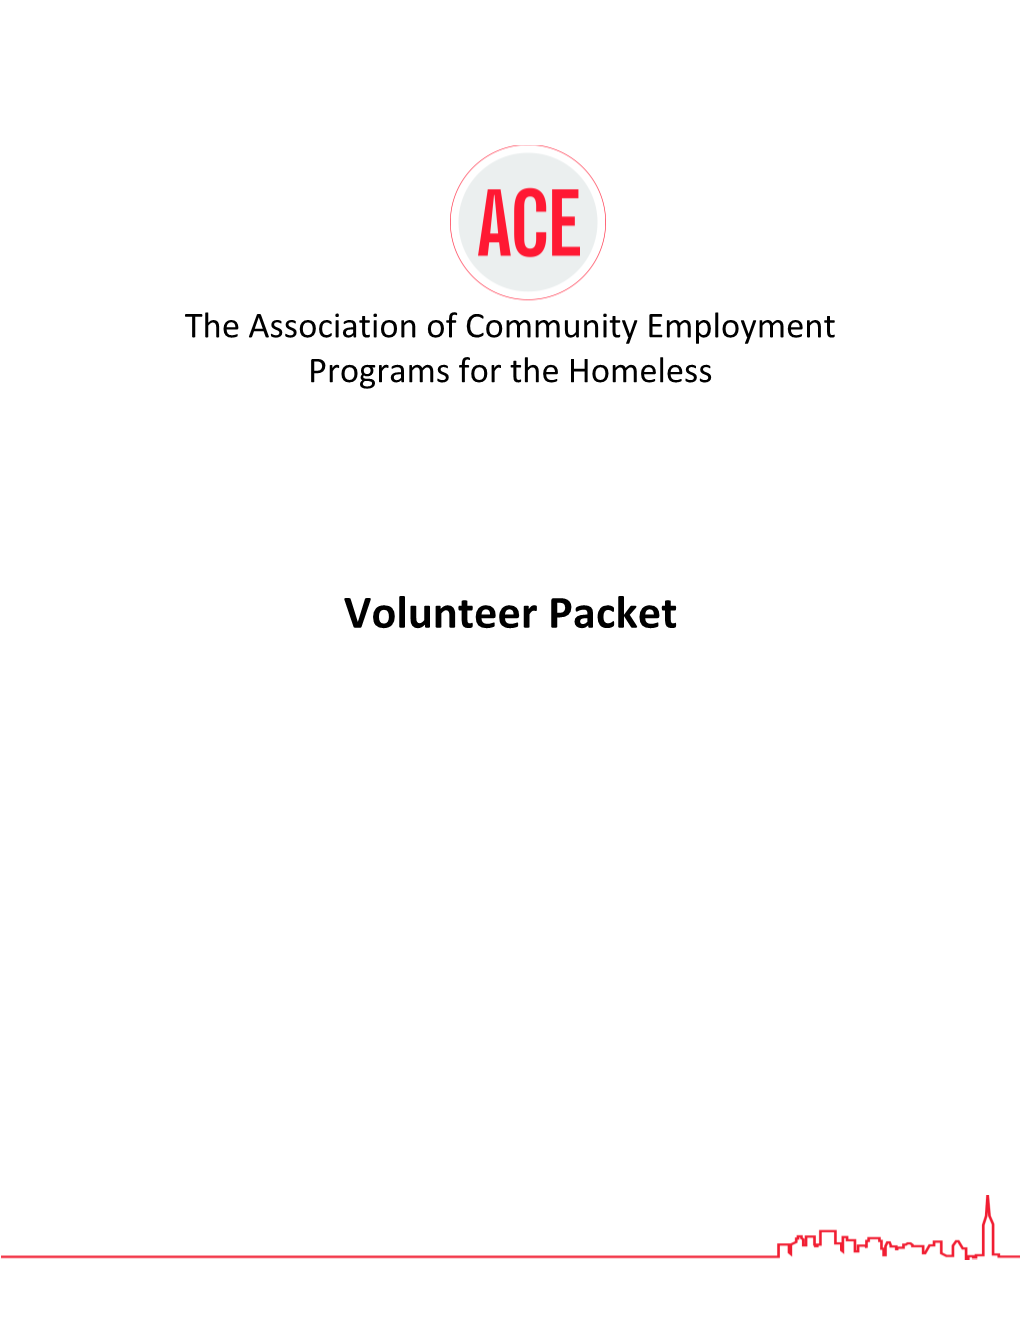 The Association of Community Employment Programs for the Homeless